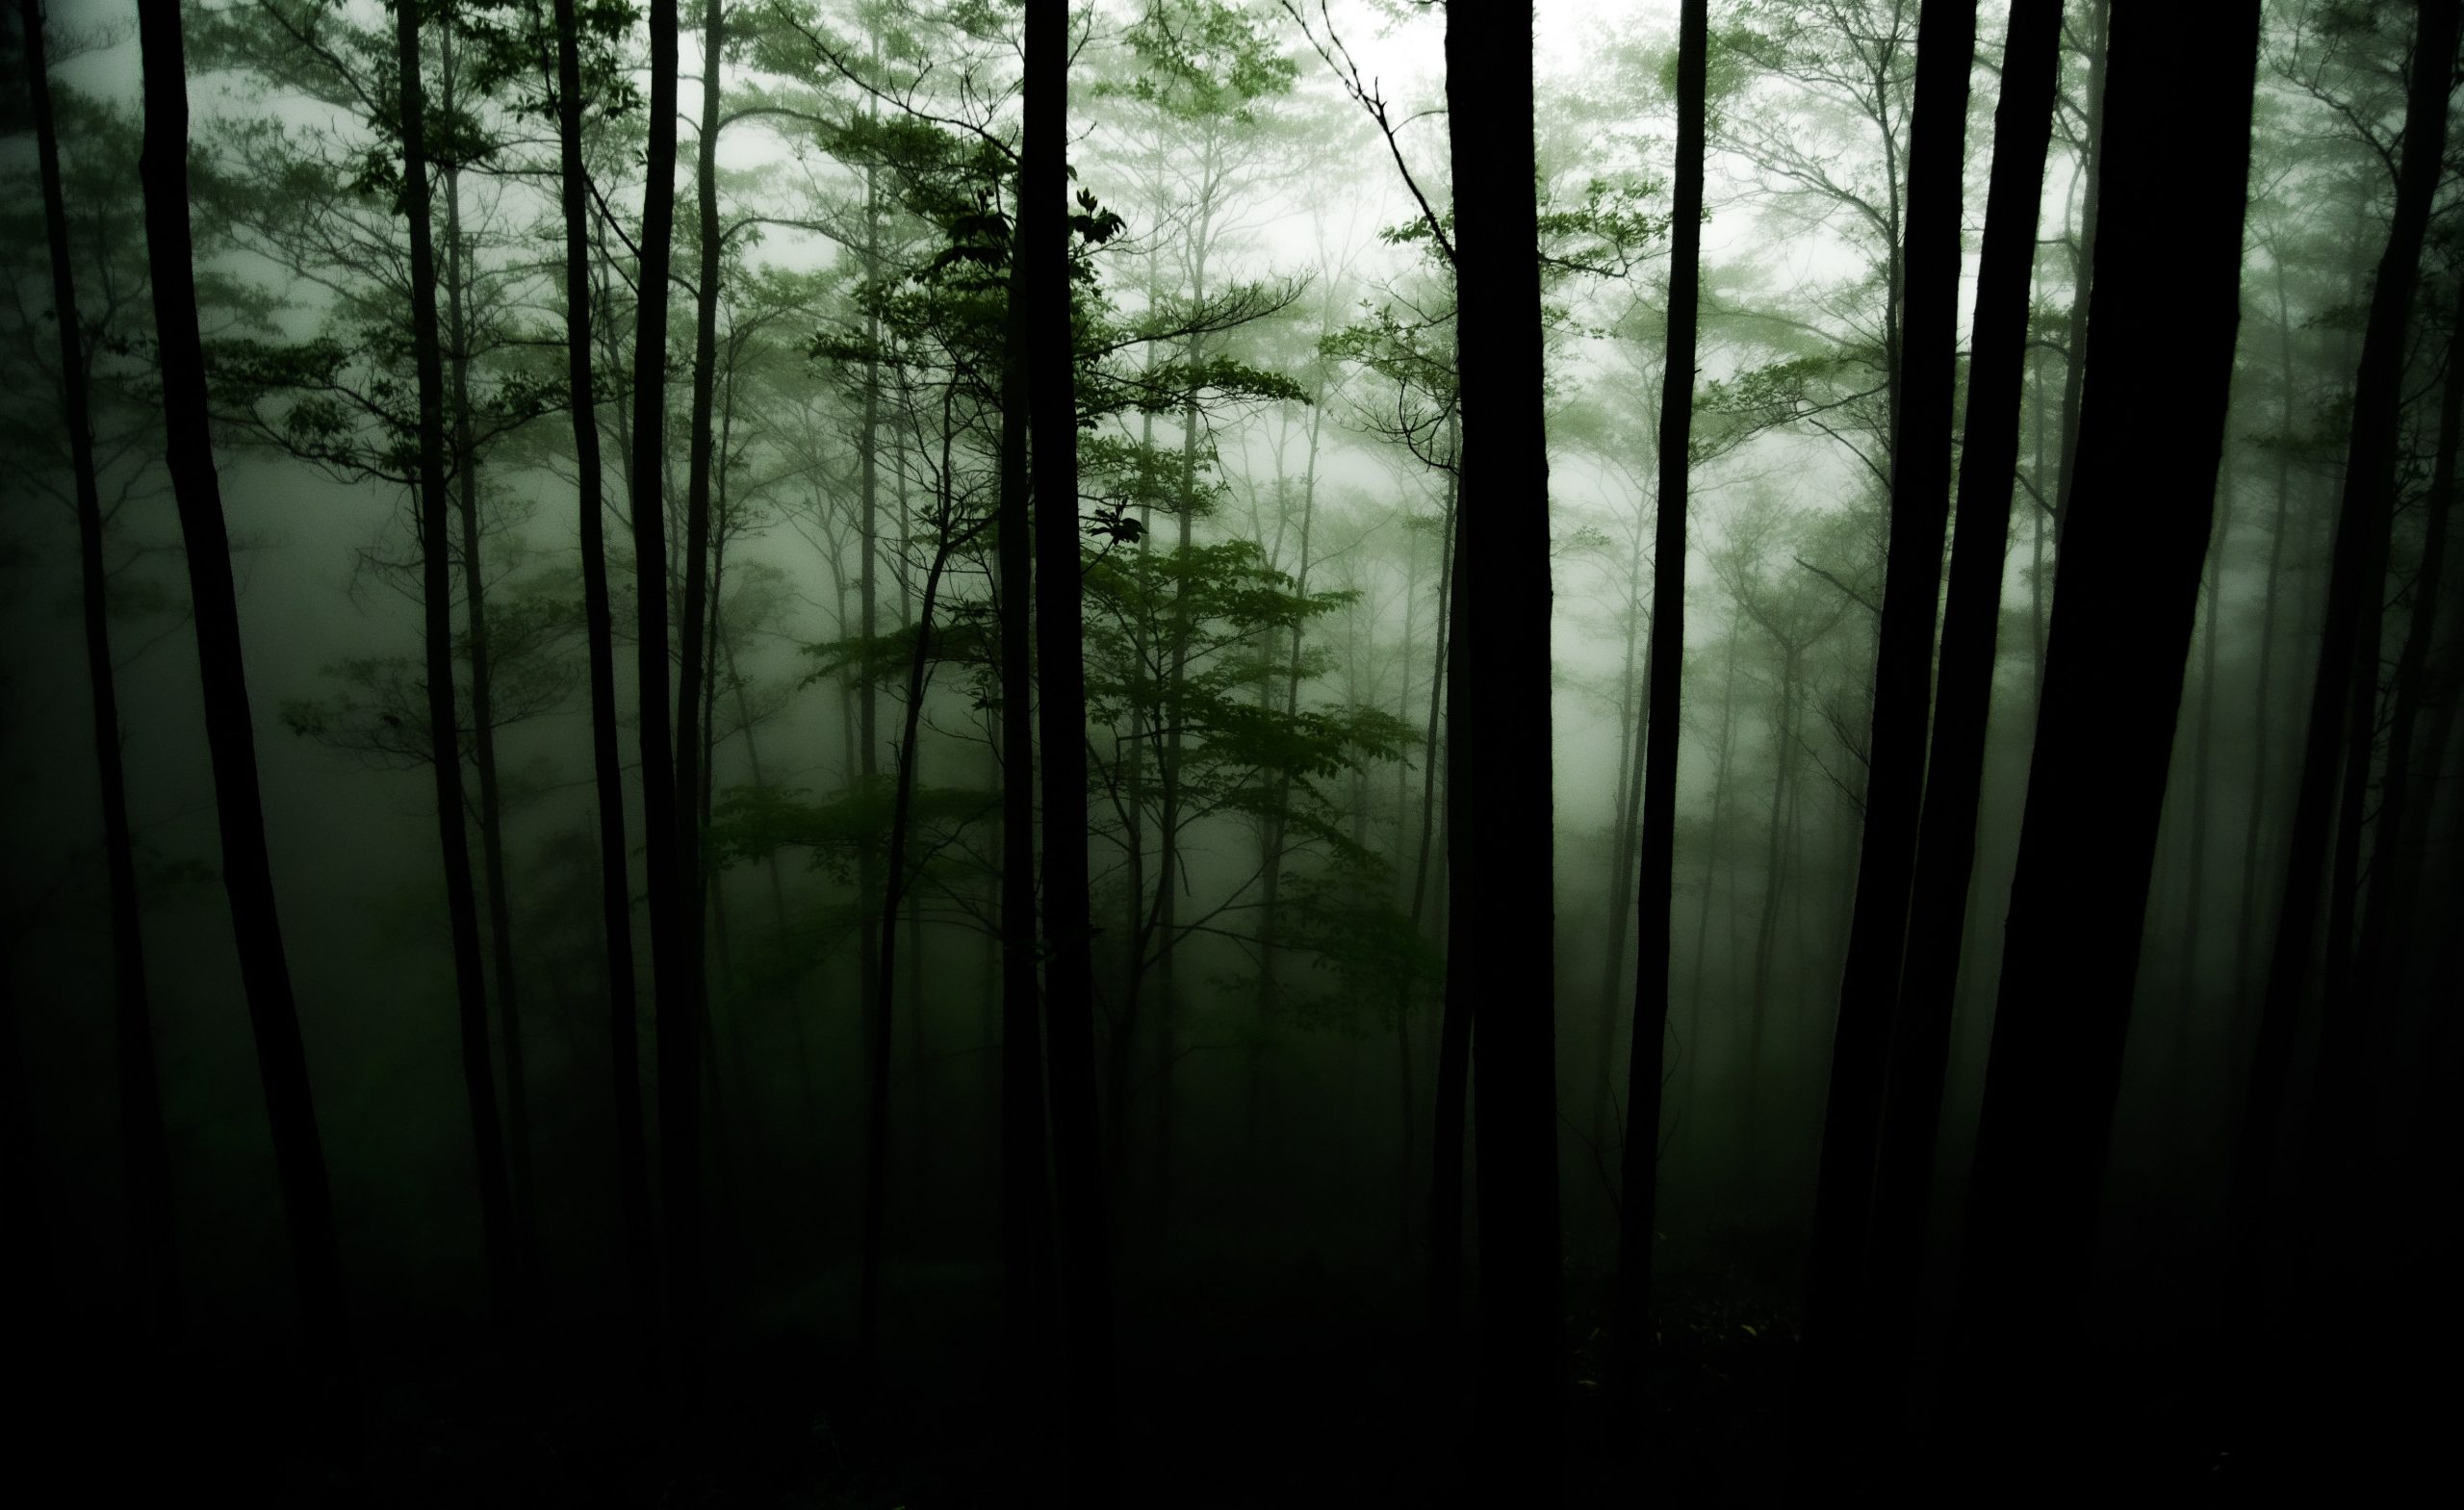 A dark forest with tall trees and fog. - Woods